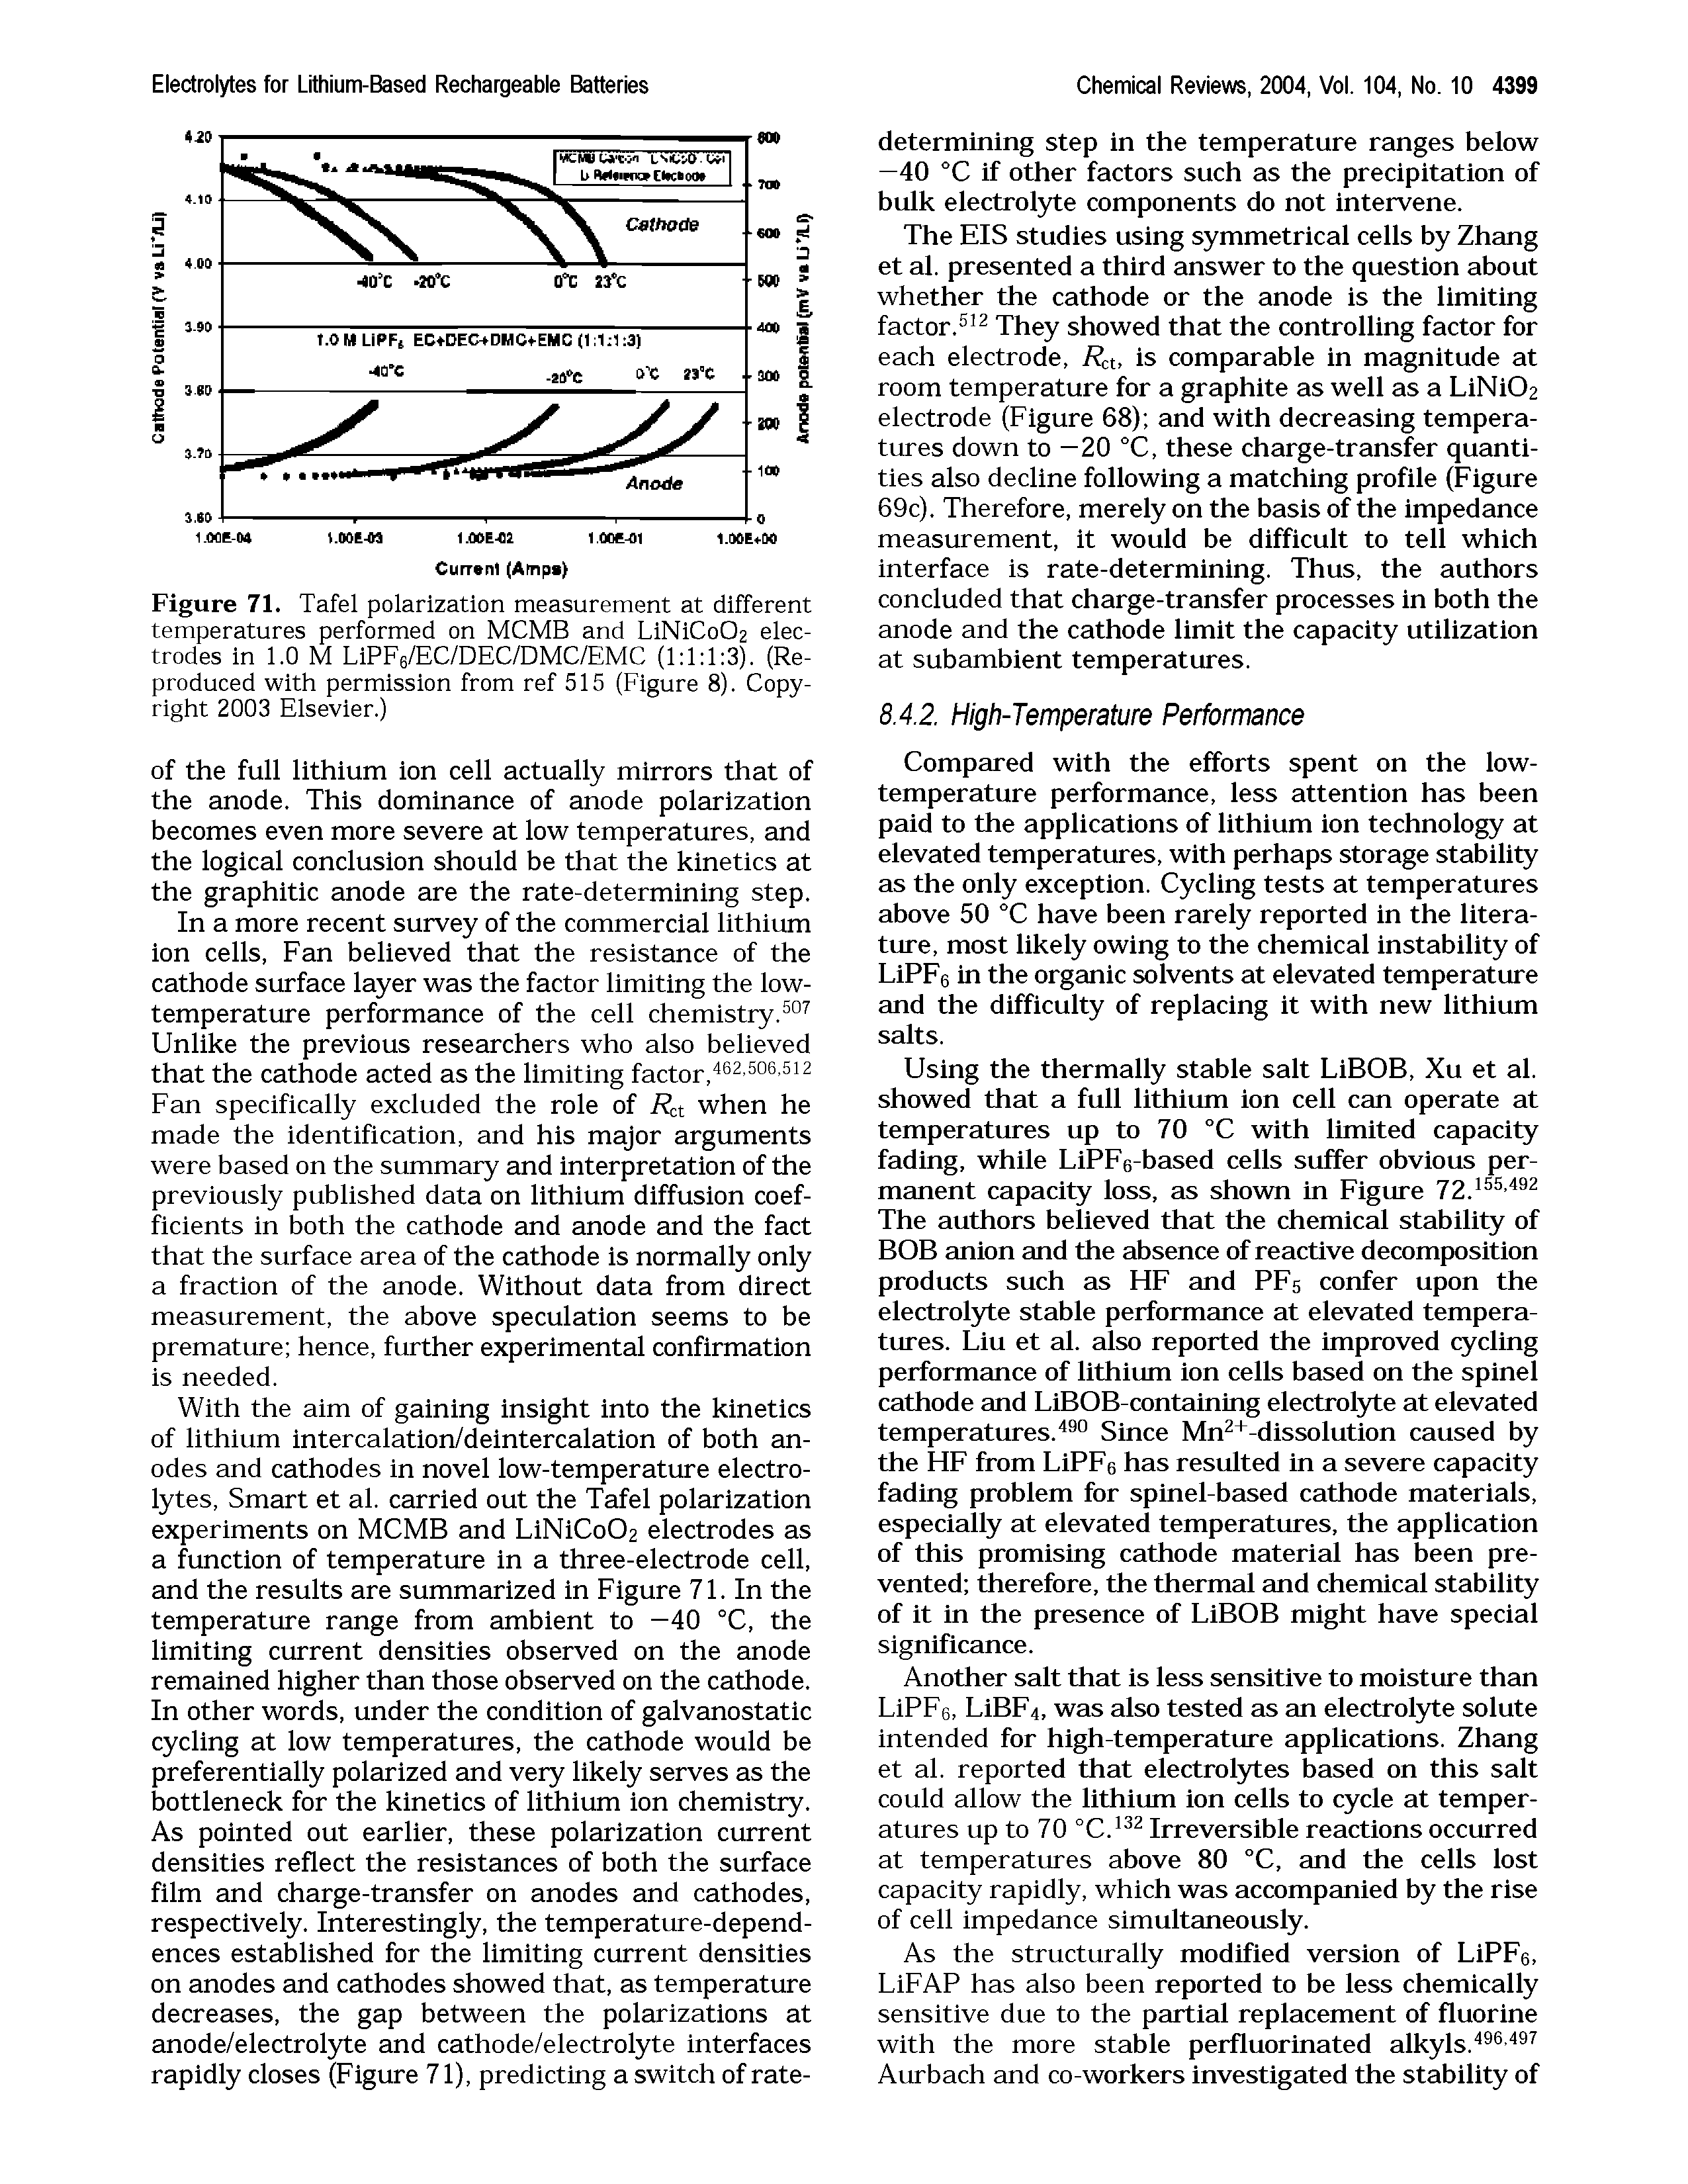 Figure 71. Tafel polarization measurement at different temperatures performed on MCMB and LiNiCo02 electrodes in 1.0 M LiPFe/EC/DEC/DMC/EMC (1 1 1 3). (Reproduced with permission from ref 515 (Figure 8). Copyright 2003 Elsevier.)...